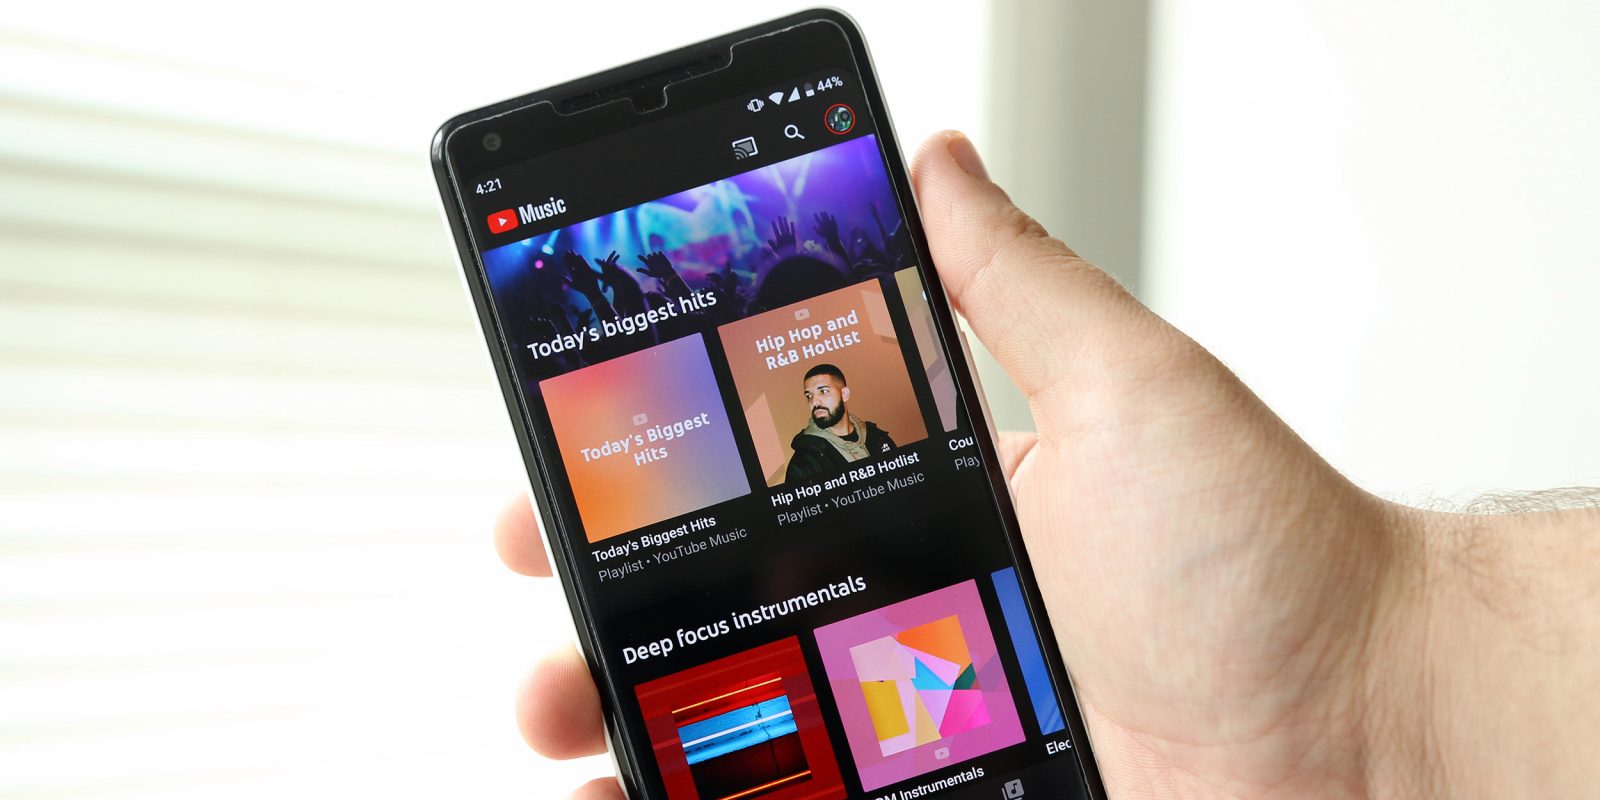 YouTube Music has launched it’s own ‘Discover Weekly’ playlist